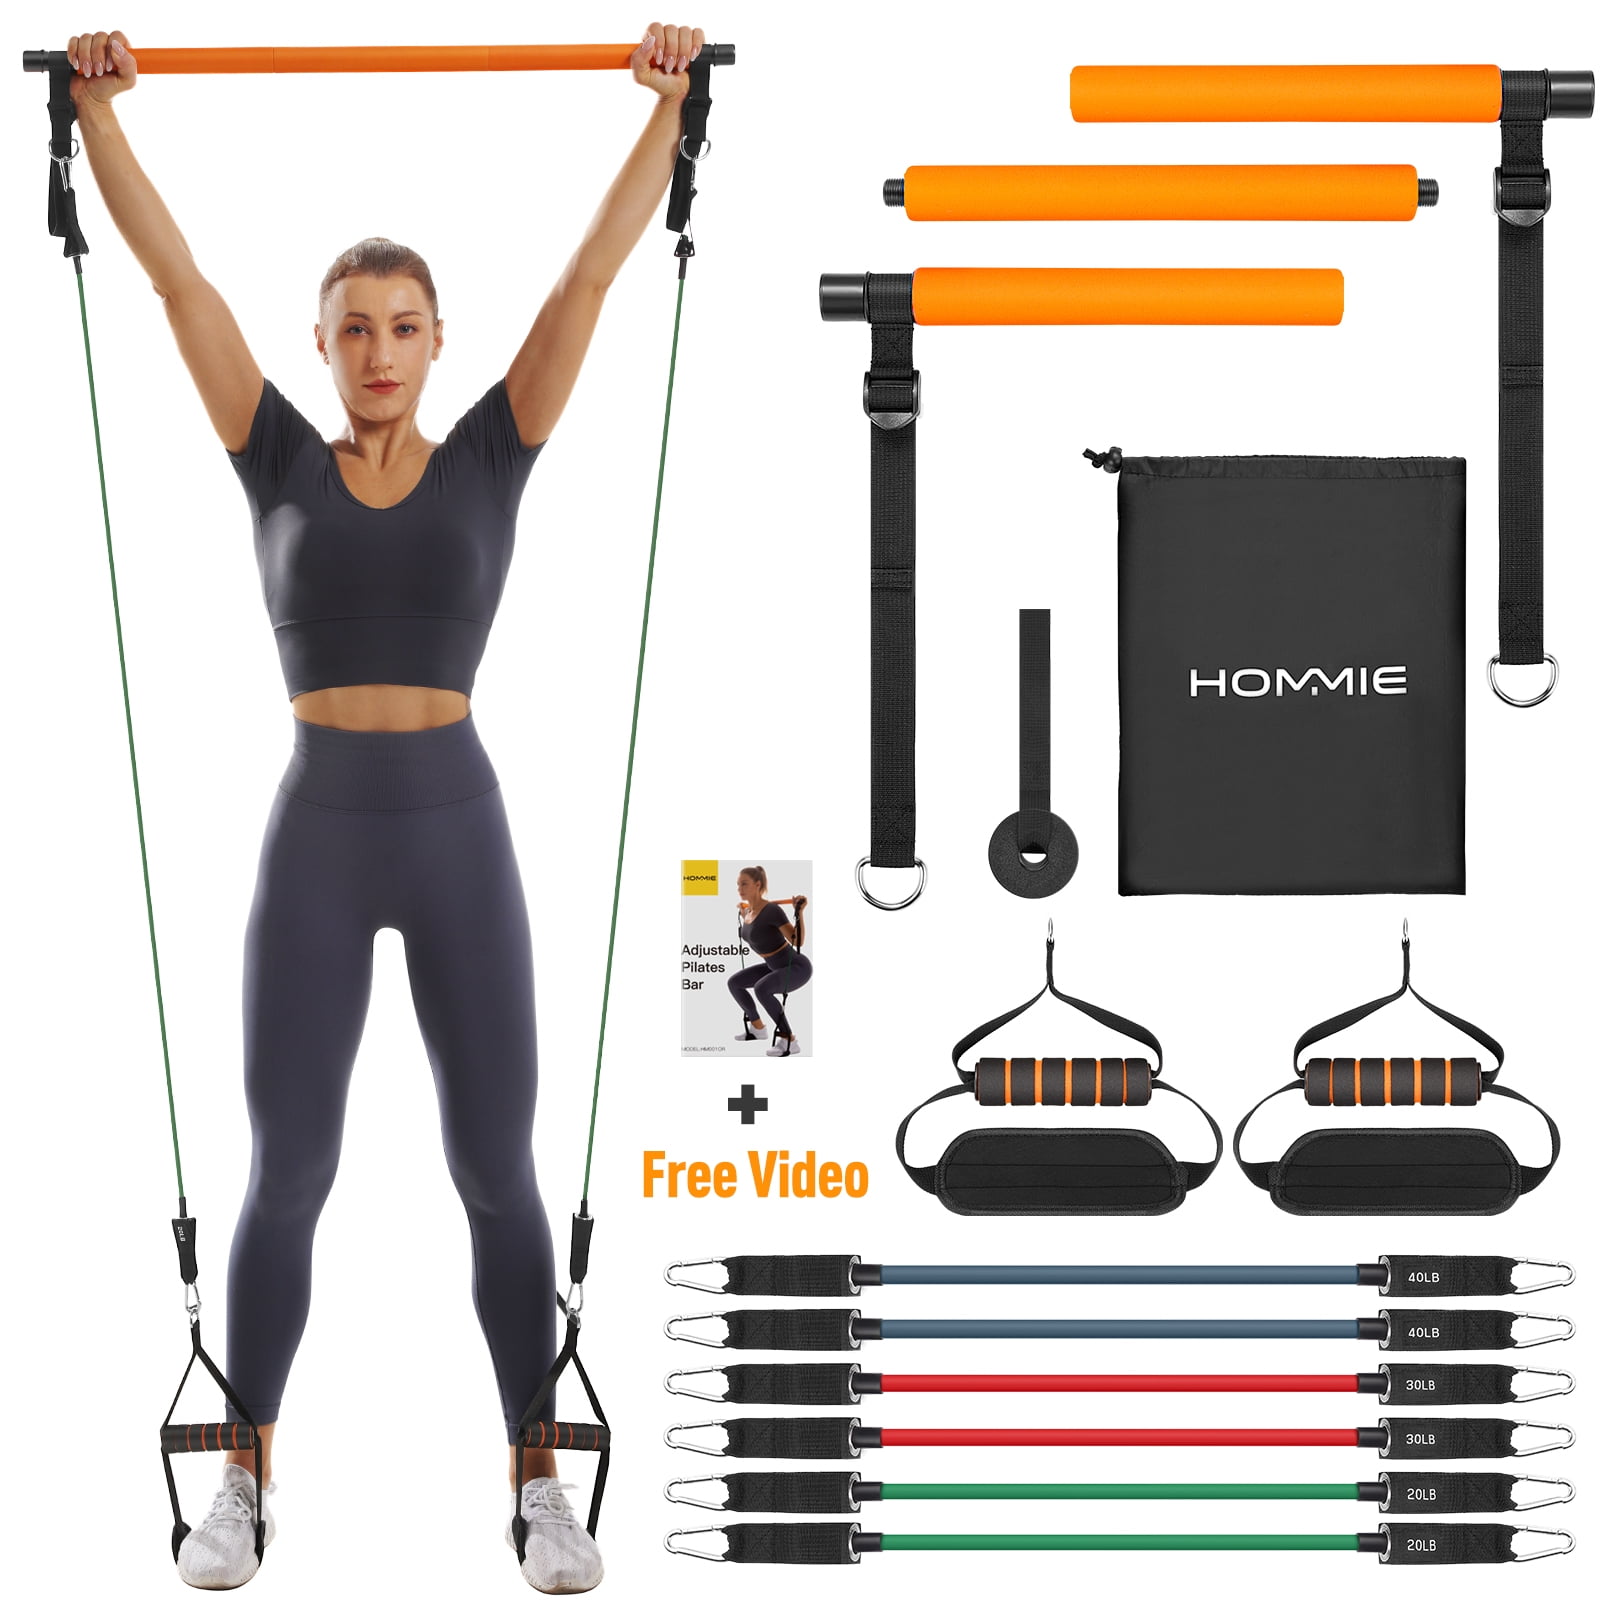 𝗖𝗛𝗔𝗠𝗣𝗬𝗔 𝗣𝗶𝗹𝗮𝘁𝗲𝘀 𝗕𝗮𝗿 𝗞𝗶𝘁 with Resistance Bands, Home Gym  Workout Gear, Weight Bands Workout, Full-Body Resistance Training Equipment,  Door Anchor Exercises for Muscle Toning., Bars -  Canada